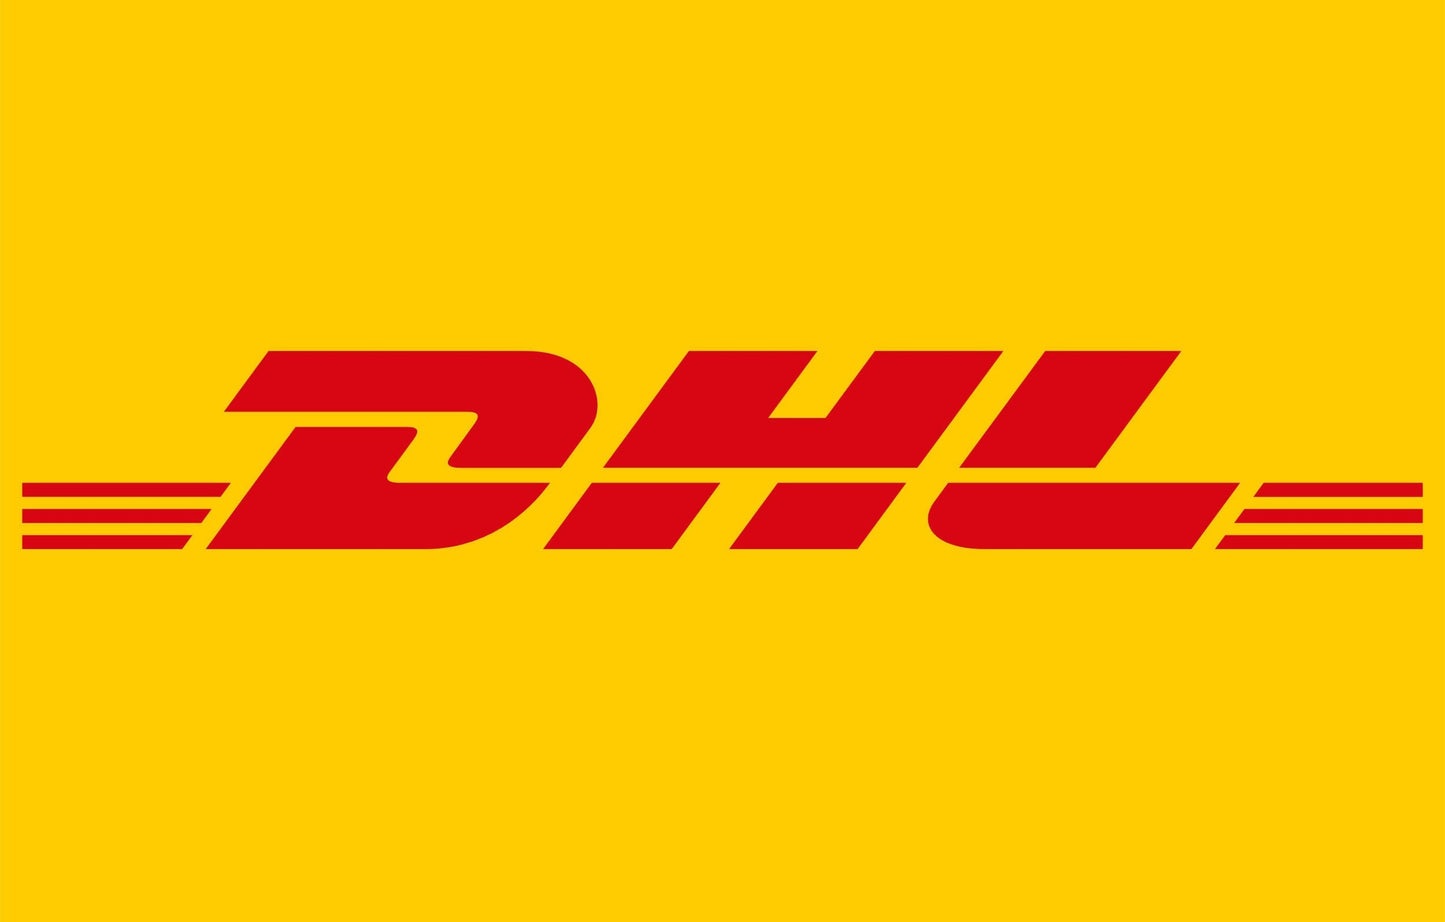 DHL Courier Express Shipping